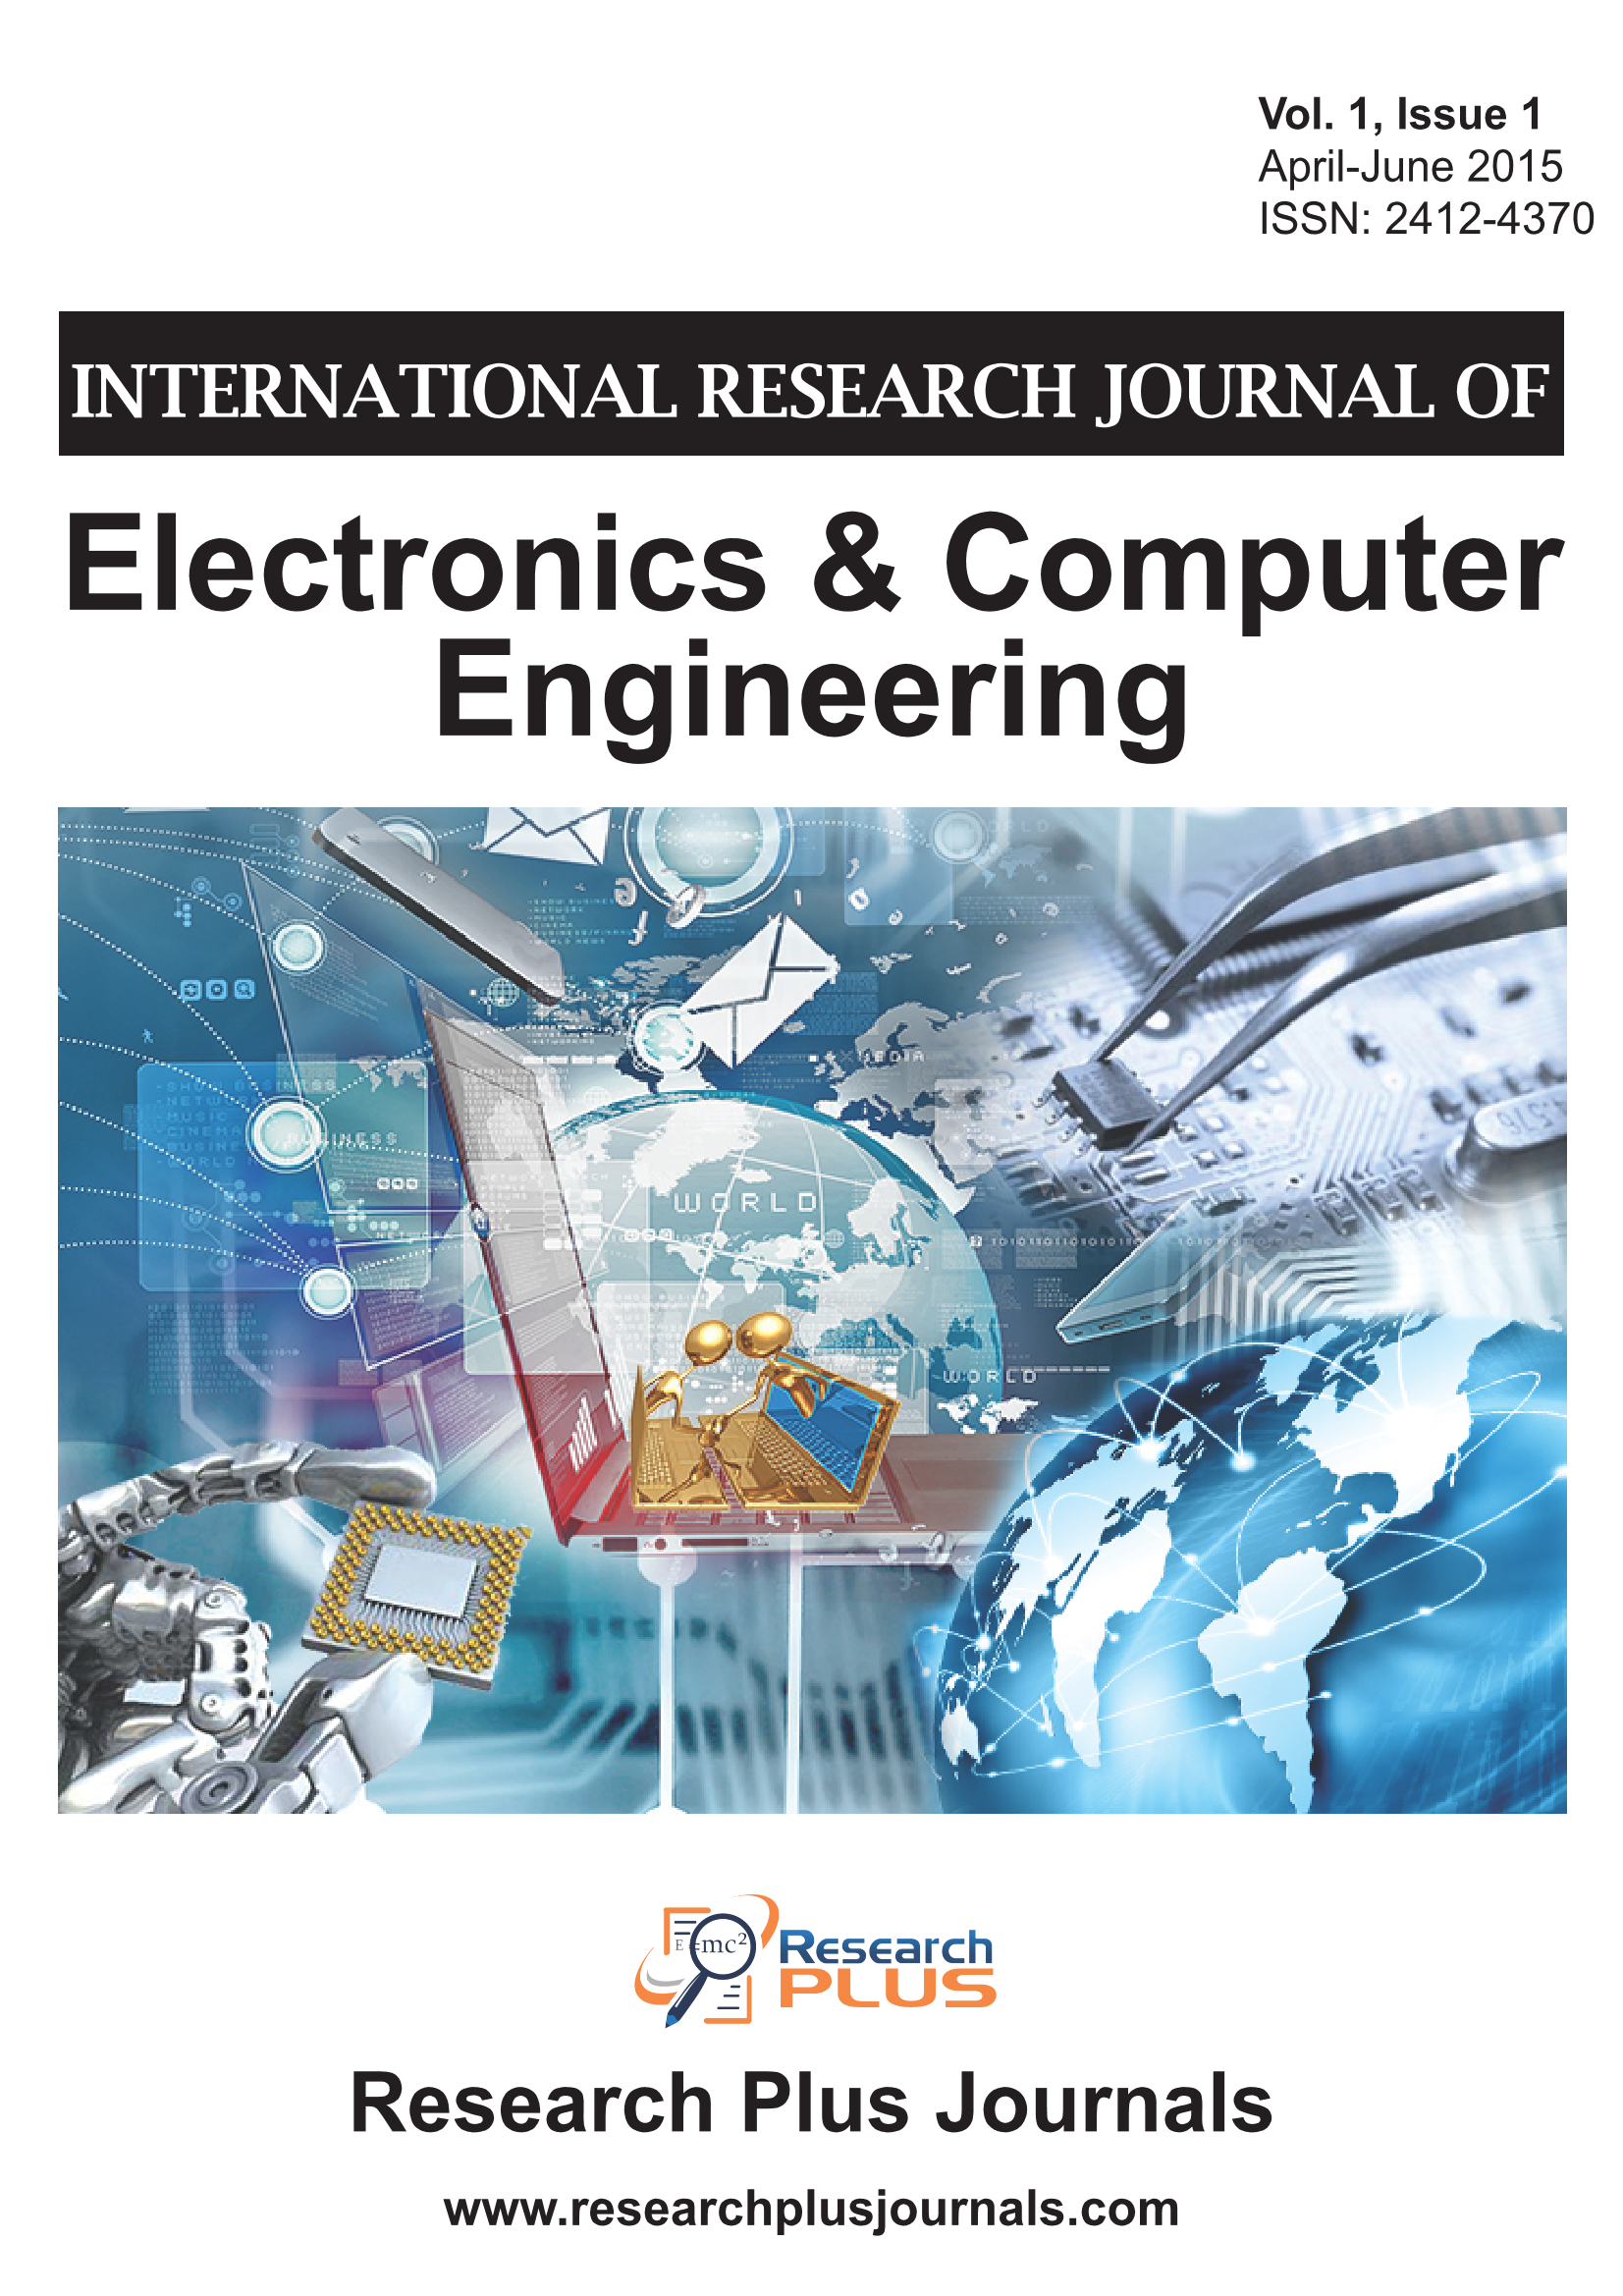 Volume 1. Issue 1, International Research Journal of Electronics and Computer Engineering